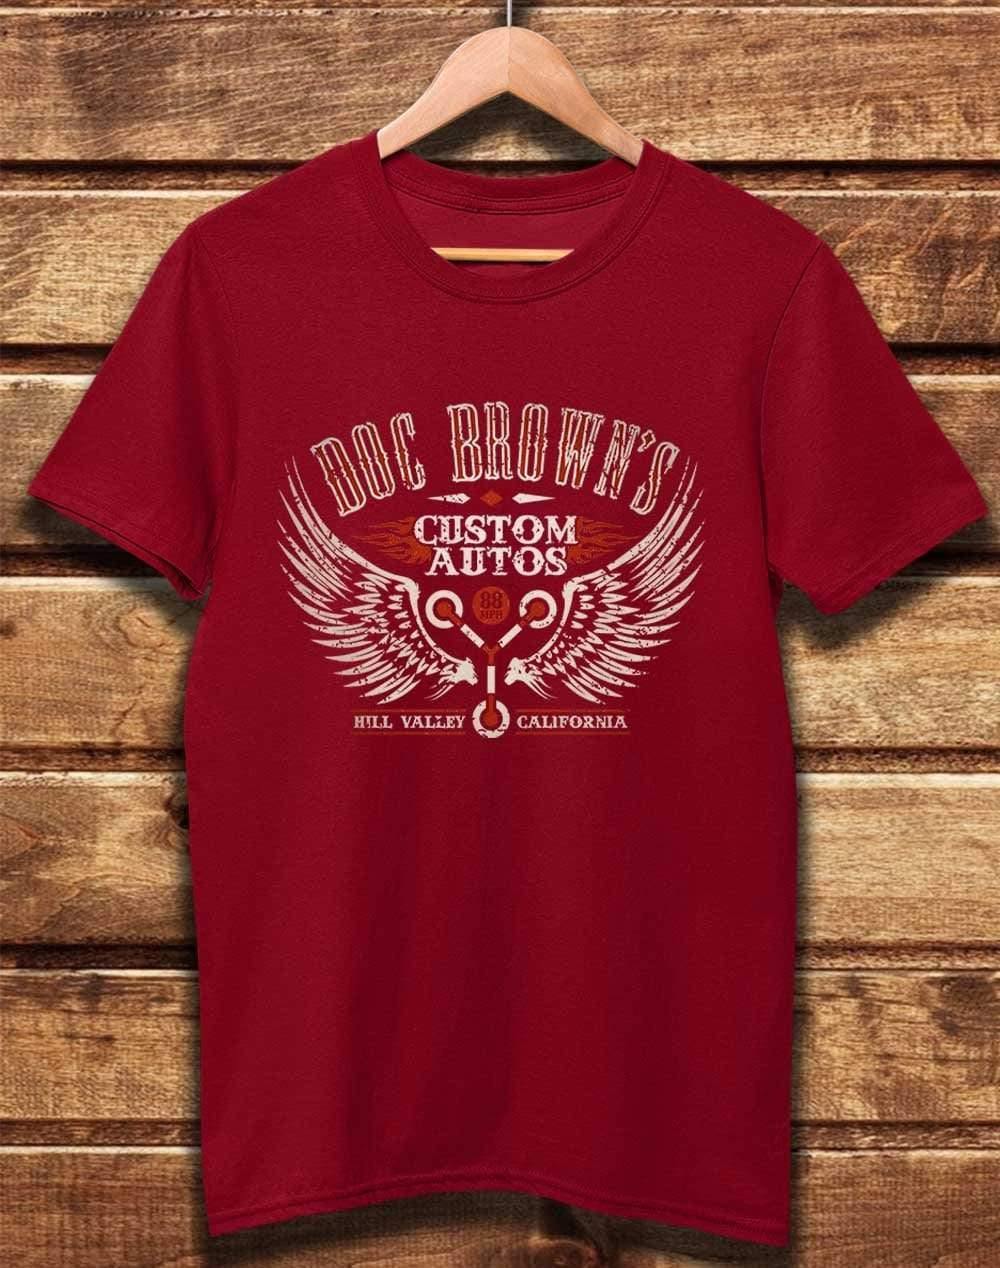 DELUXE Doc Brown's Custom Autos Organic Cotton T-Shirt XS / Dark Red  - Off World Tees